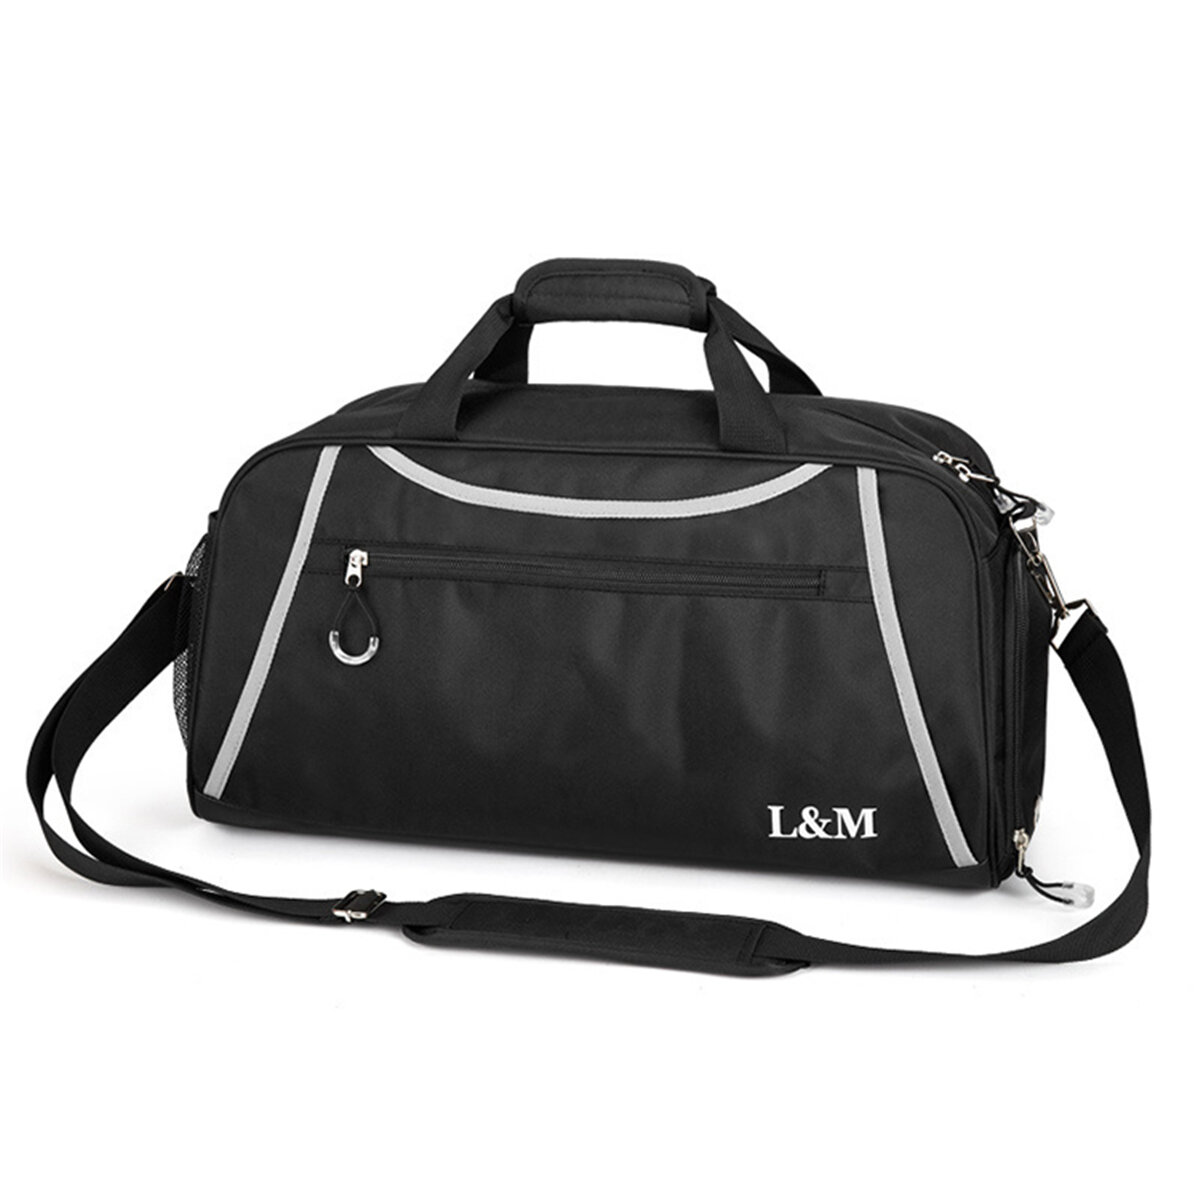 Sport Gym Training Fitness Bag Outdoor Travel Handbags Yoga Bags with Shoes Compartment